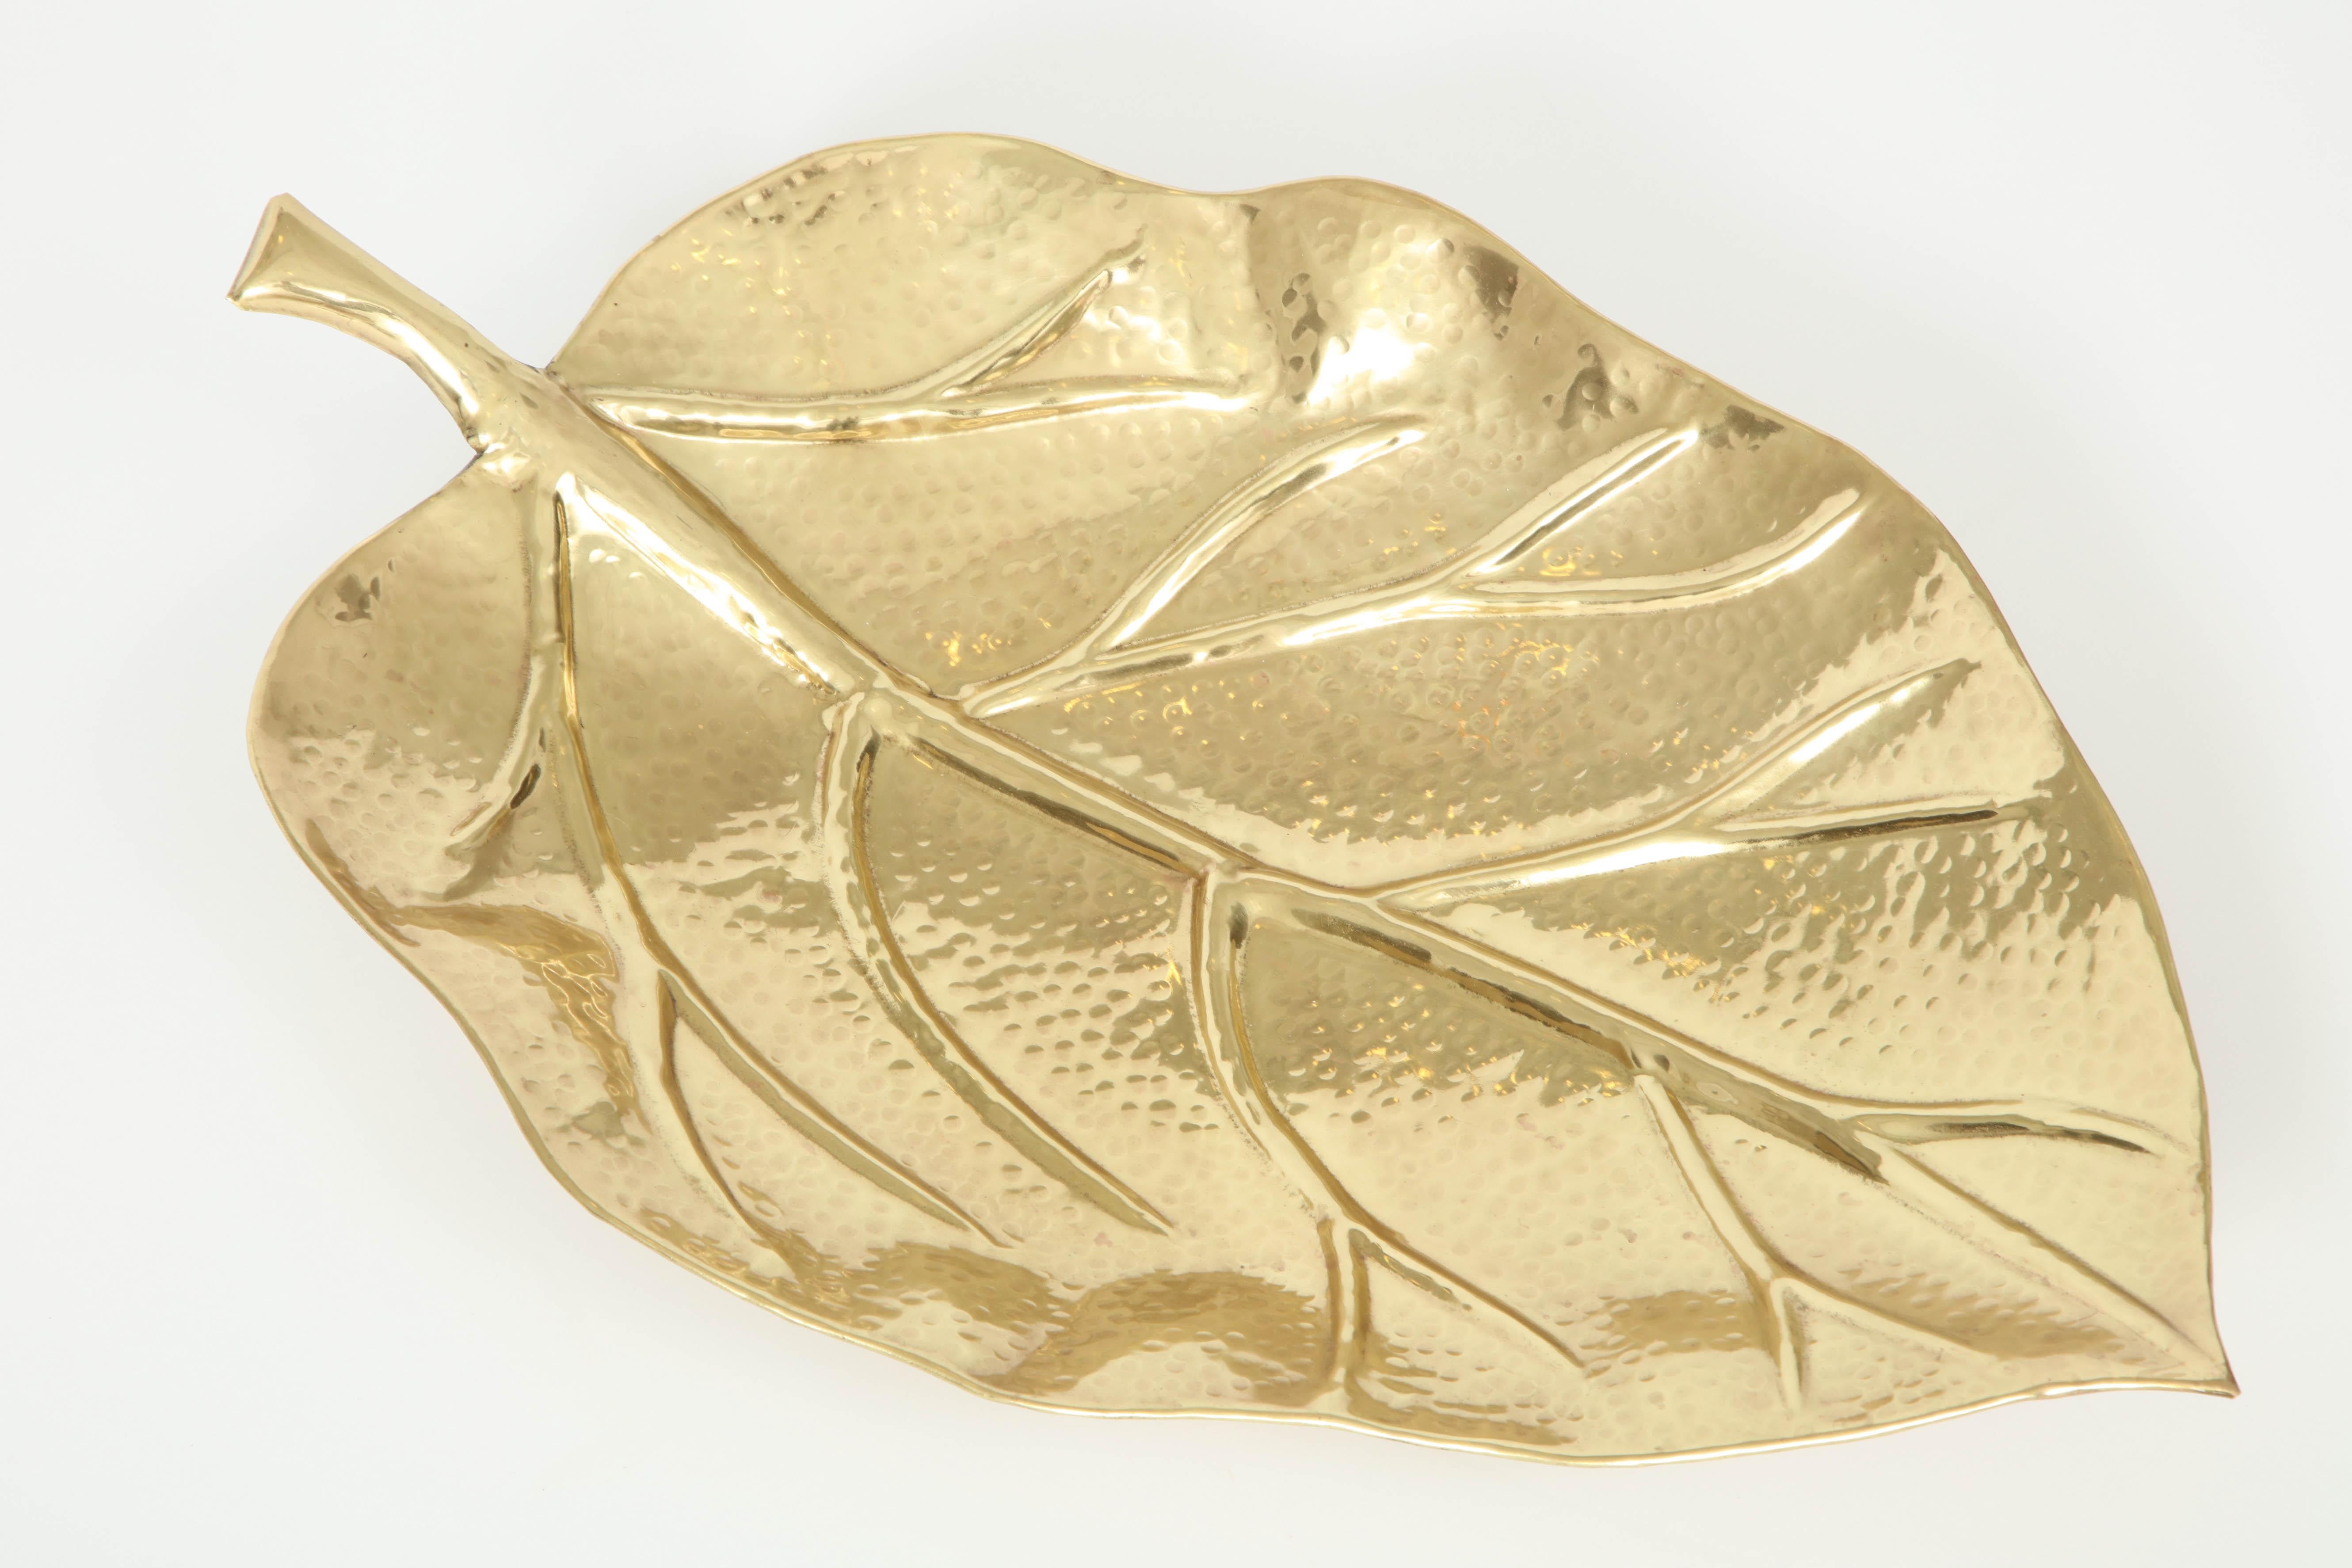 Decorative midcentury brass bowl in the shape of a large leaf, Italy, circa 1950.